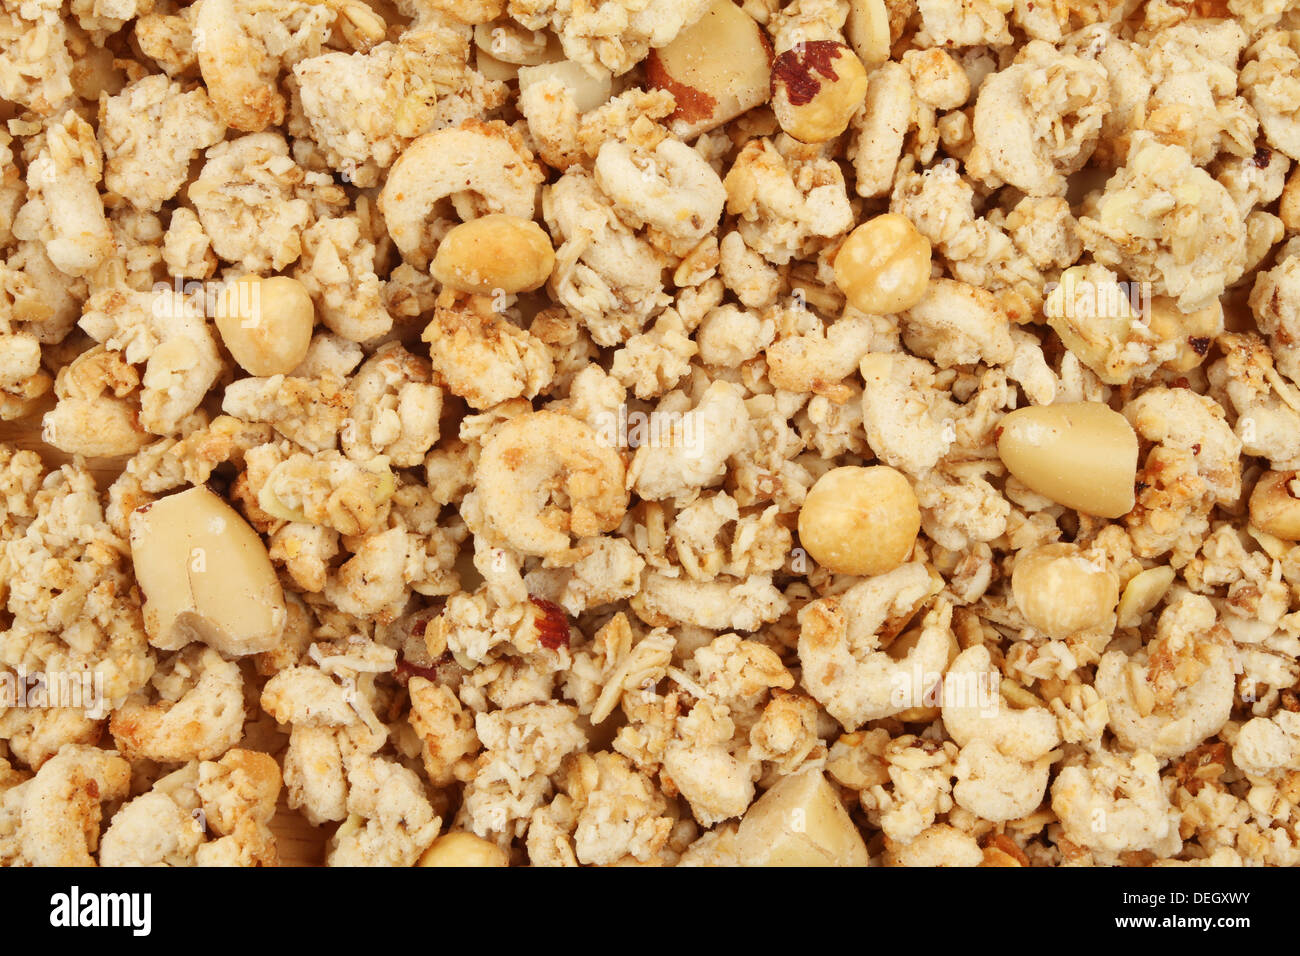 Crunchy nut cluster cereal as a background and texture Stock Photo